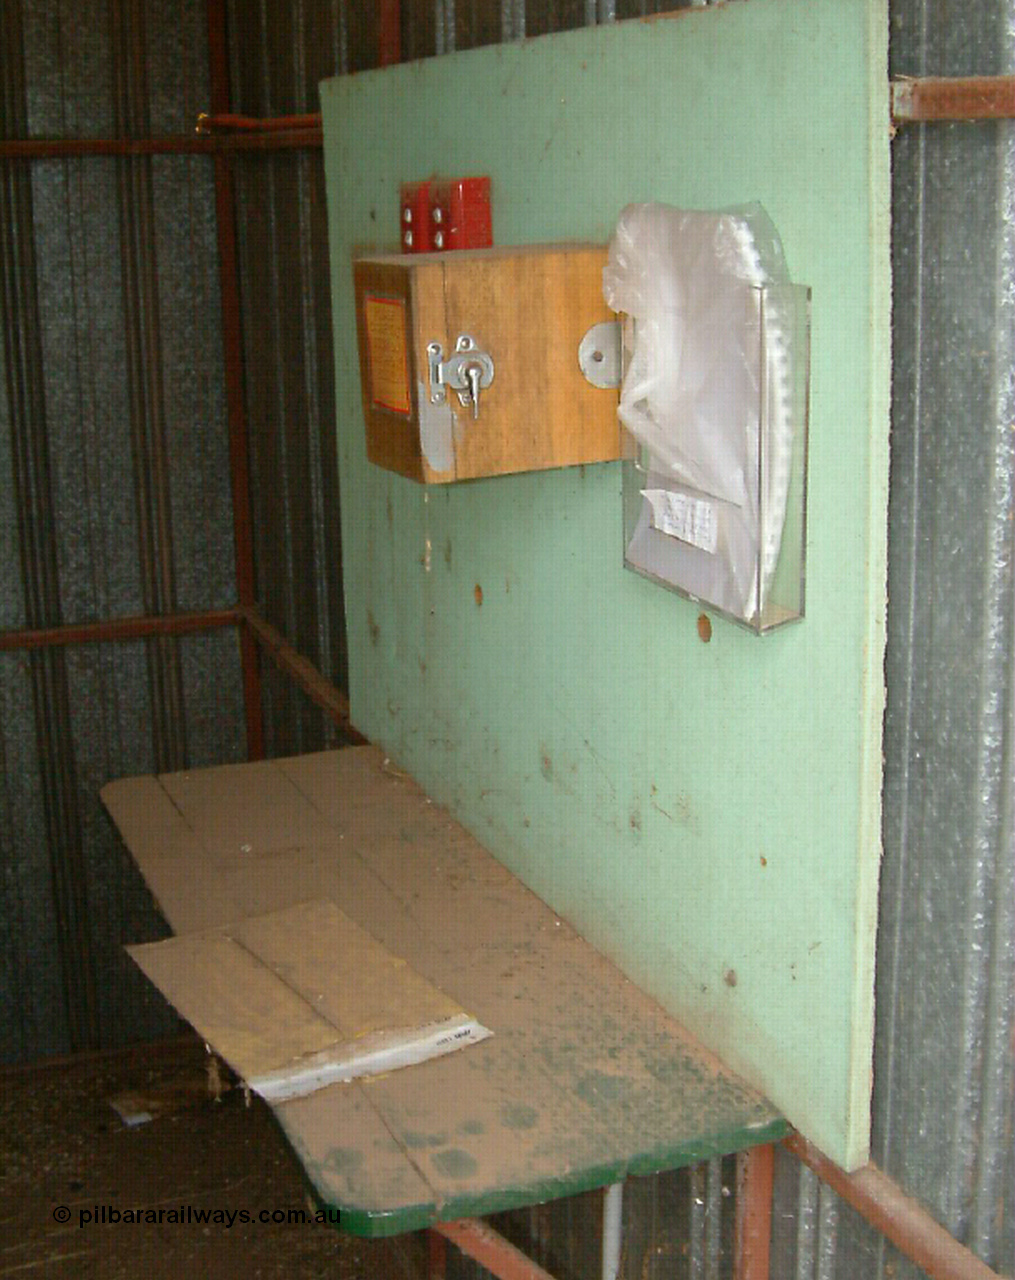 030405 165918
Wudinna, internal view of the train control cabin with desk and phone box for receiving train orders, 5th April 2003
